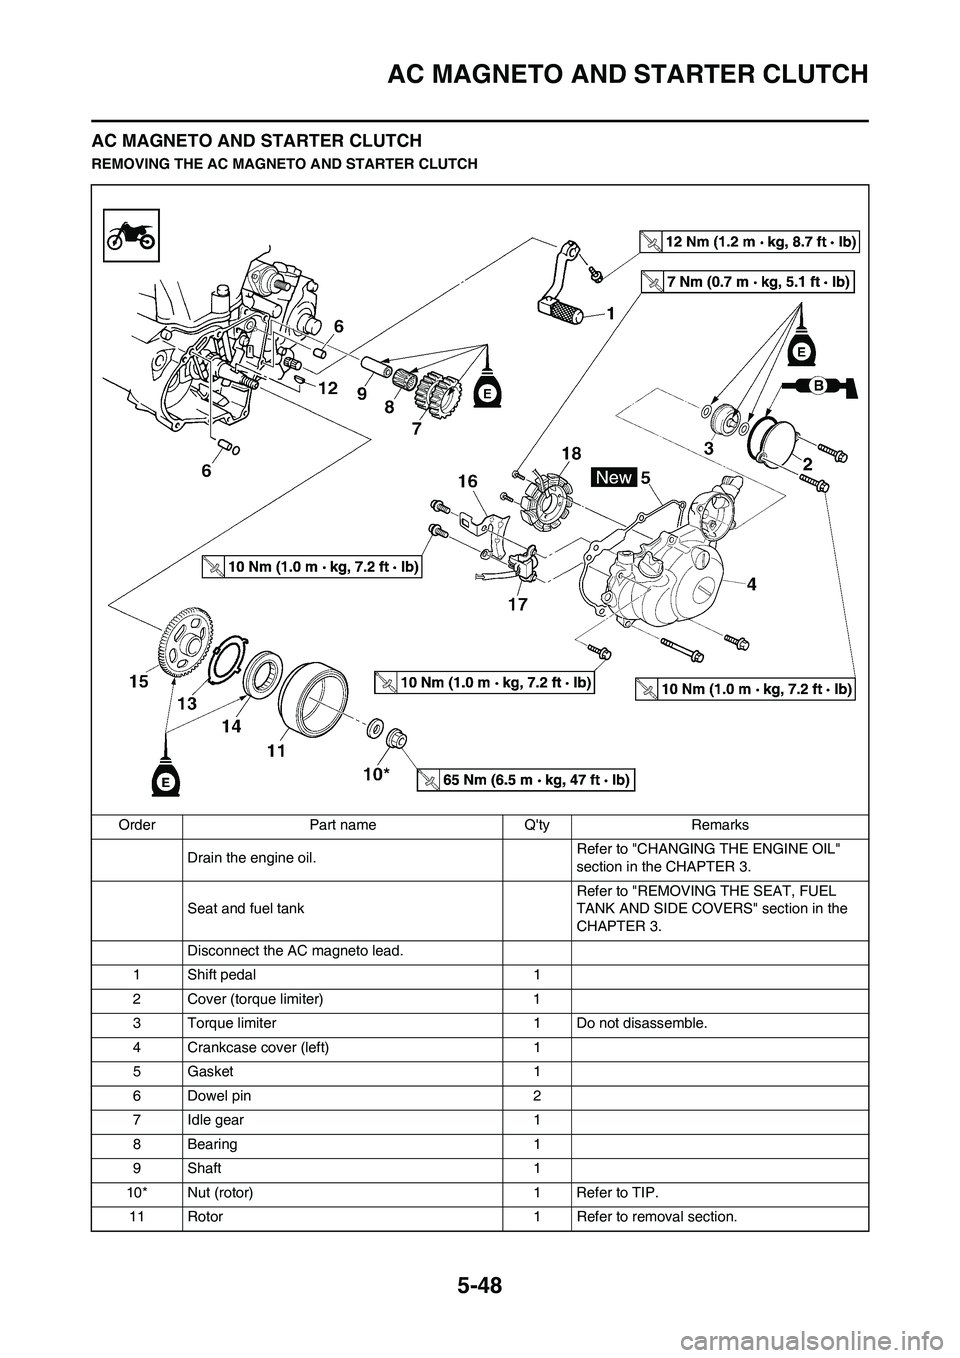 YAMAHA WR 450F 2010 Owners Guide 5-48
AC MAGNETO AND STARTER CLUTCH
AC MAGNETO AND STARTER CLUTCH
REMOVING THE AC MAGNETO AND STARTER CLUTCH
Order Part name Qty Remarks
Drain the engine oil.Refer to "CHANGING THE ENGINE OIL" 
sectio